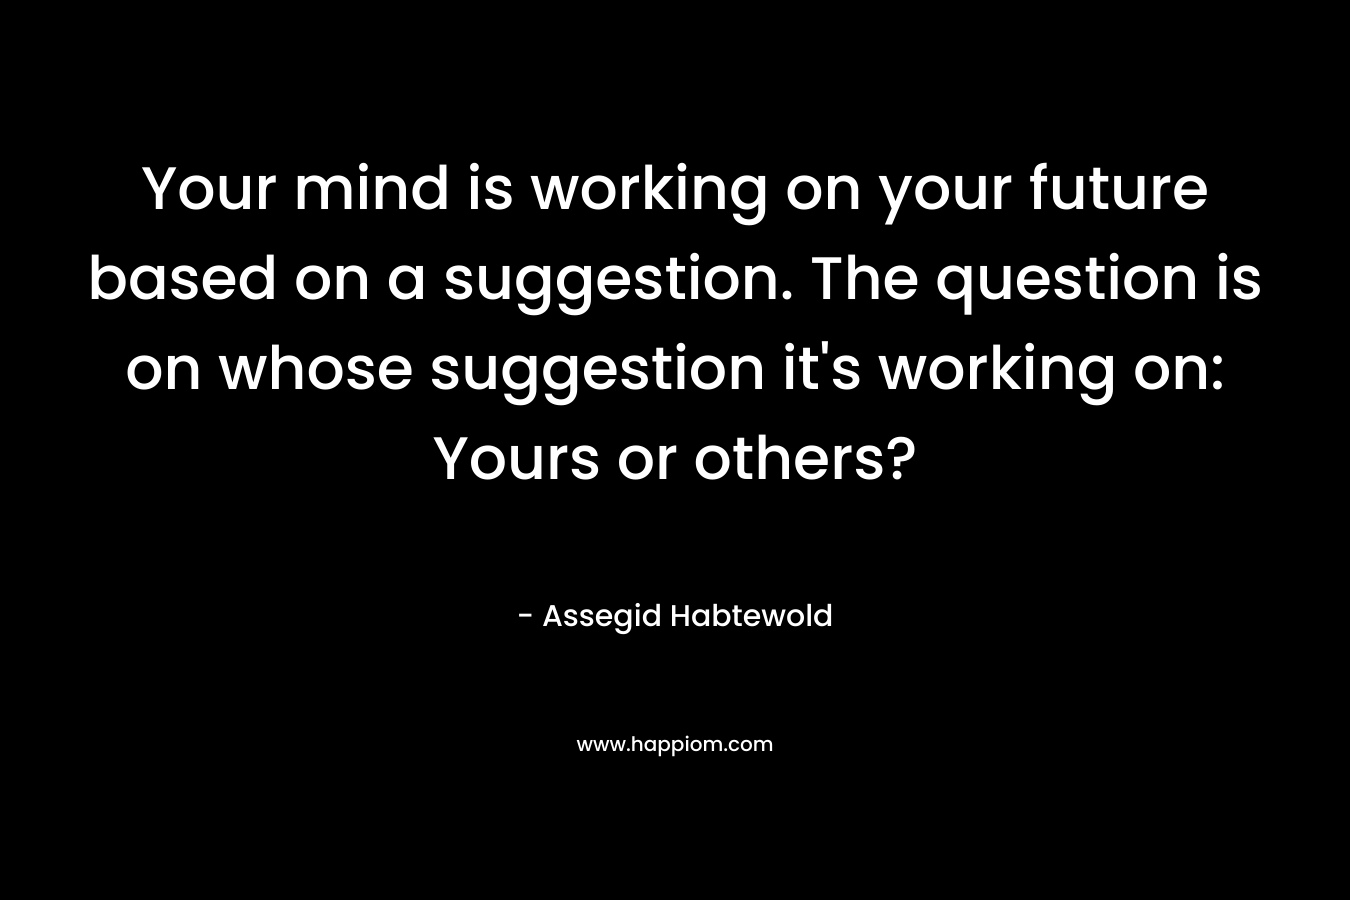 Your mind is working on your future based on a suggestion. The question is on whose suggestion it's working on: Yours or others?